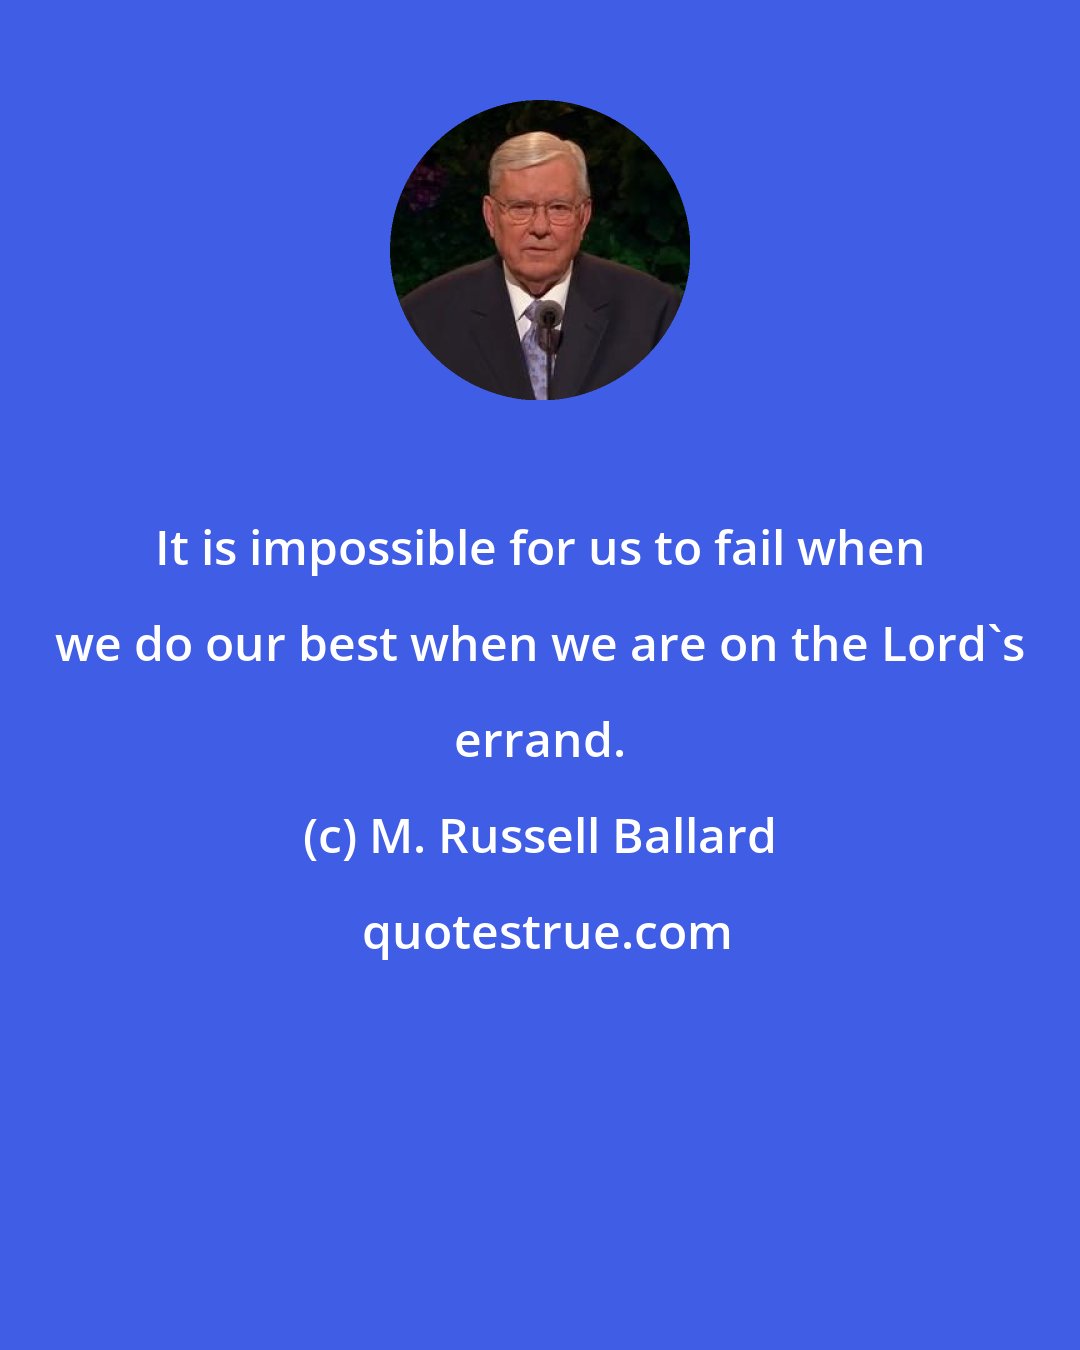 M. Russell Ballard: It is impossible for us to fail when we do our best when we are on the Lord's errand.